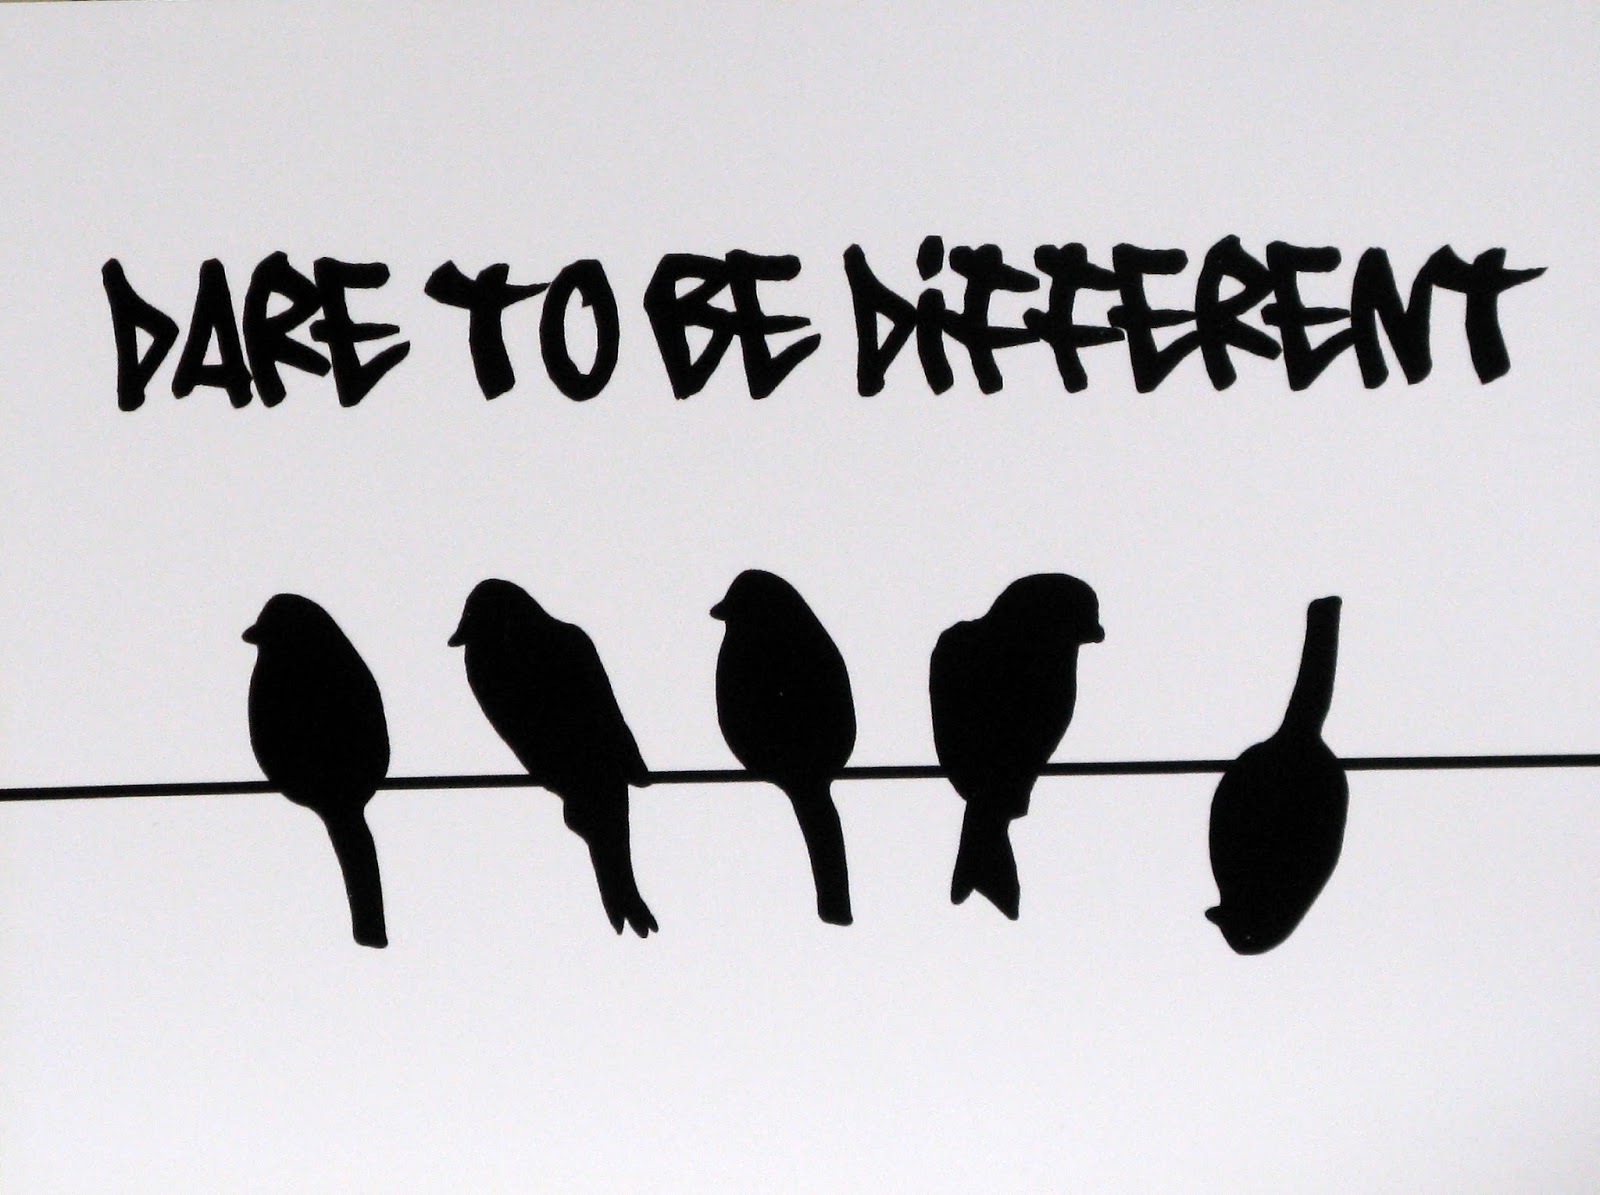 Allow to be different. To be different. "Dare to be different" д. "Dare to be different" дфвф. Be different силуэт.